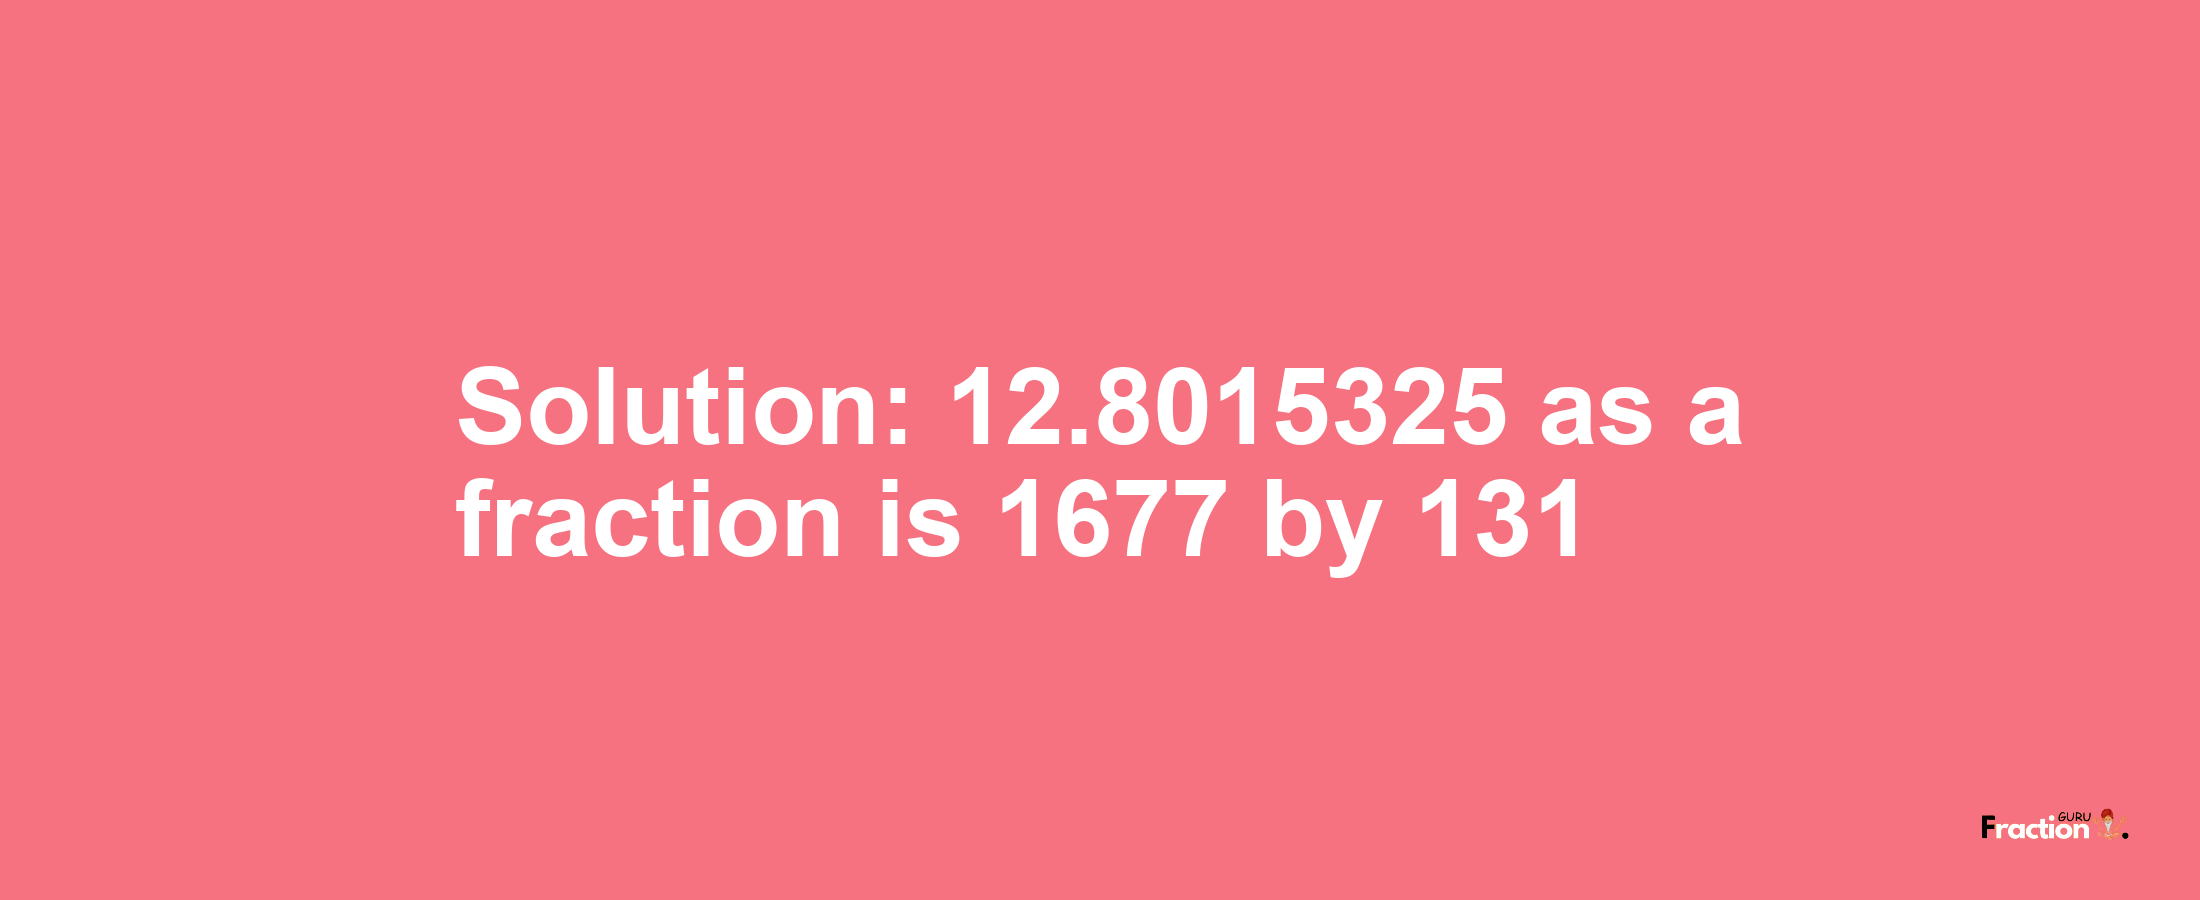 Solution:12.8015325 as a fraction is 1677/131